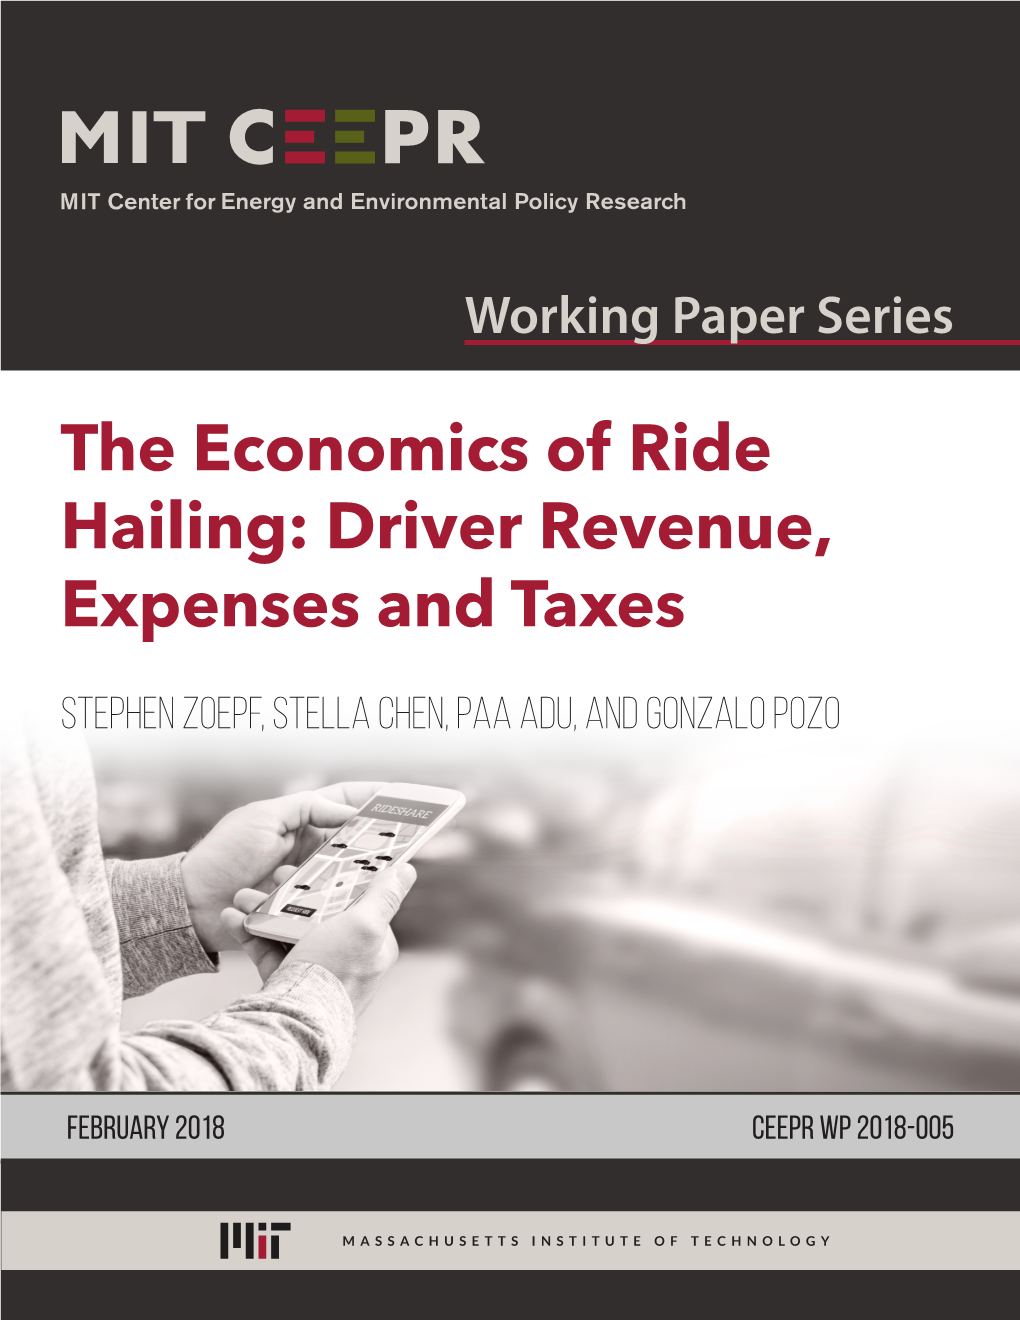 The Economics of Ride Hailing: Driver Revenue, Expenses and Taxes Stephen Zoepf, Stella Chen, Paa Adu, and Gonzalo Pozo